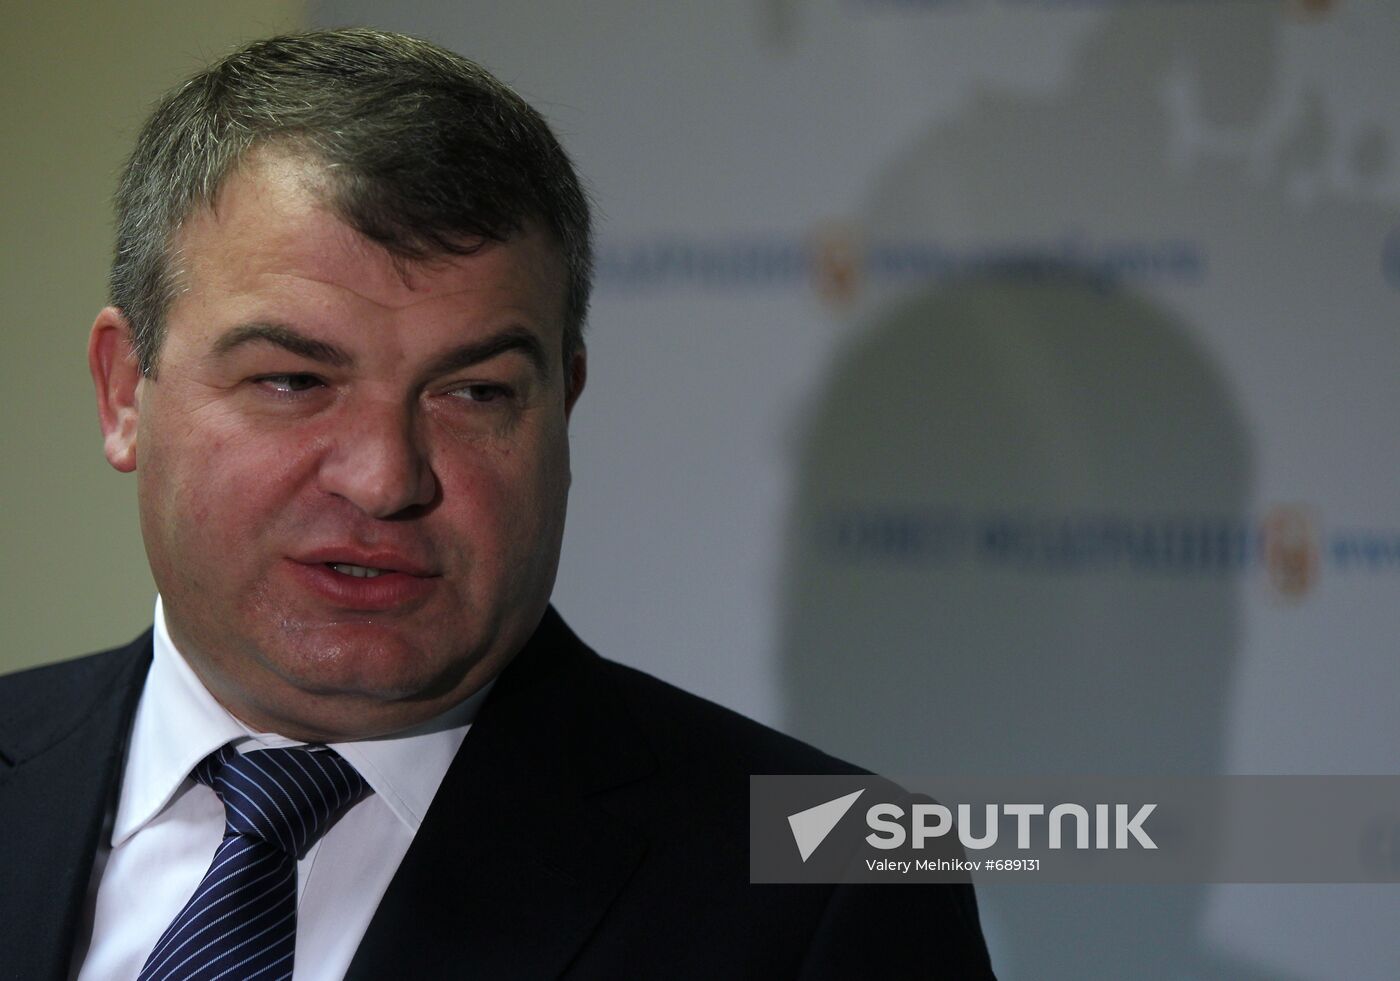 Anatoly Serdyukov speaks at Federation Council meeting